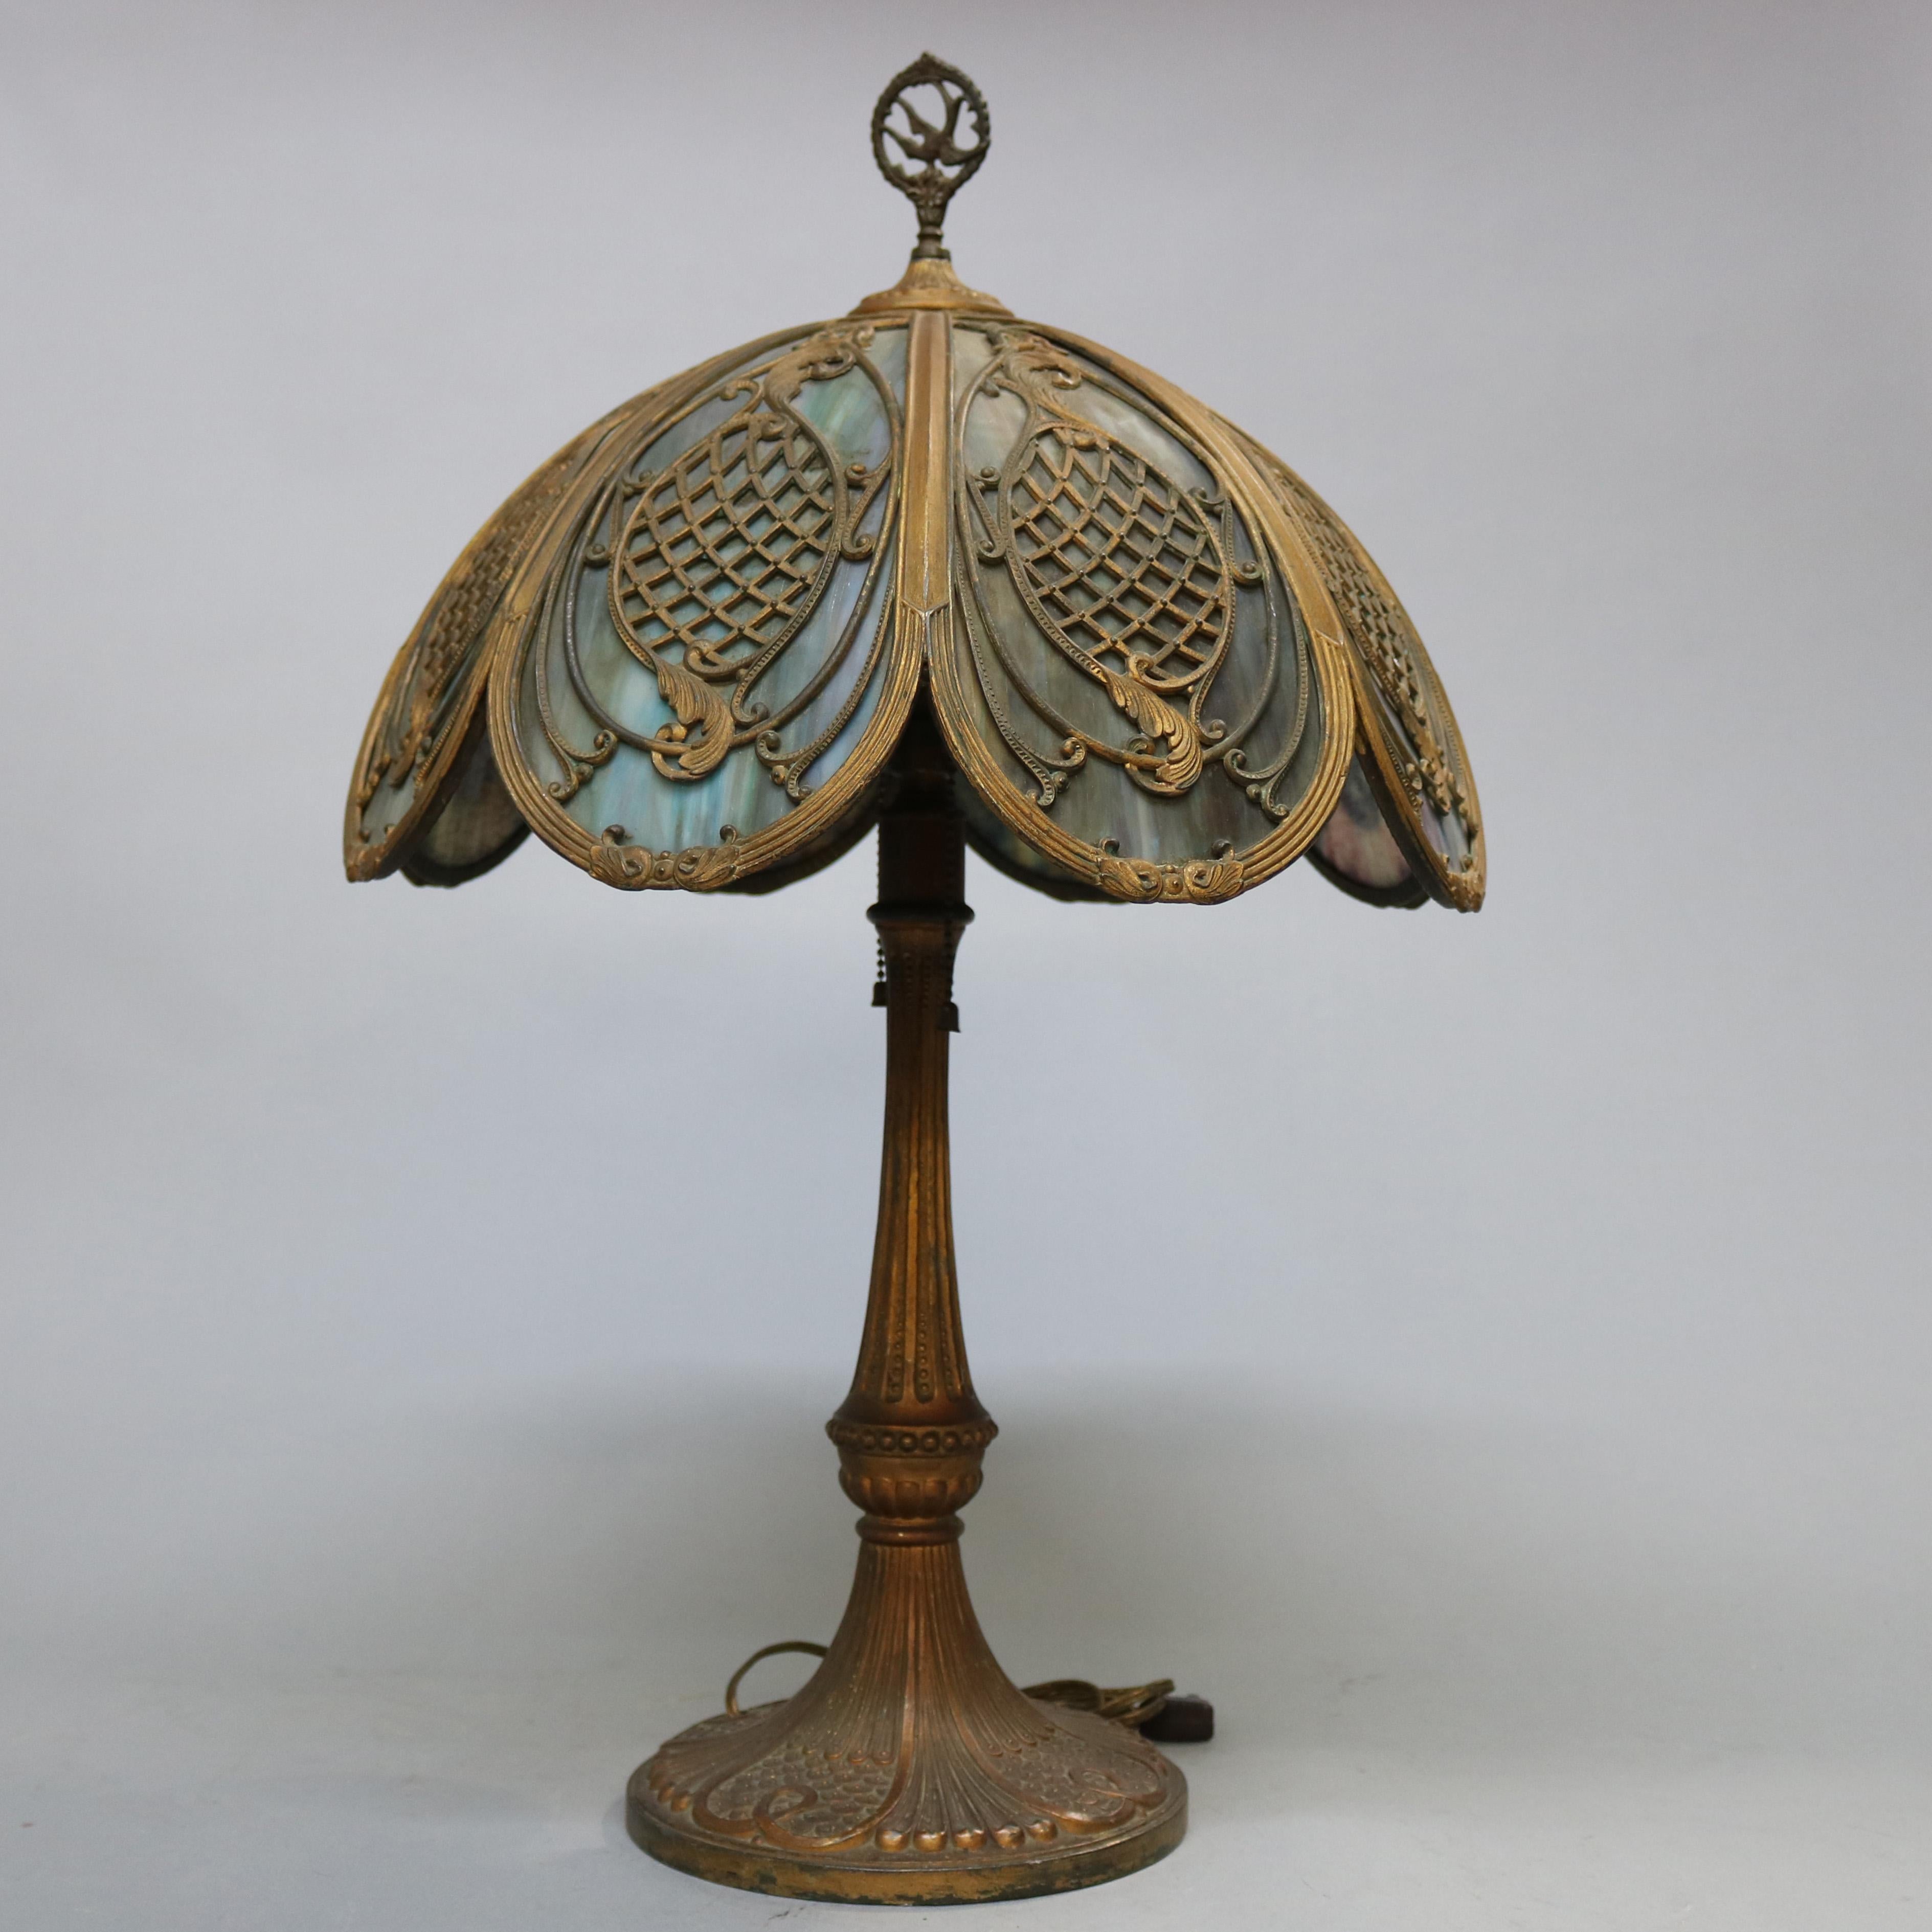 An antique Arts & Crafts Bradley and Hubbard table lamp offers dome shade with pierced filigree scroll, foliate and diamond patterned panels having bent slag glass and stylized bird finial, surmounting double socket base, circa 1920

Measures -